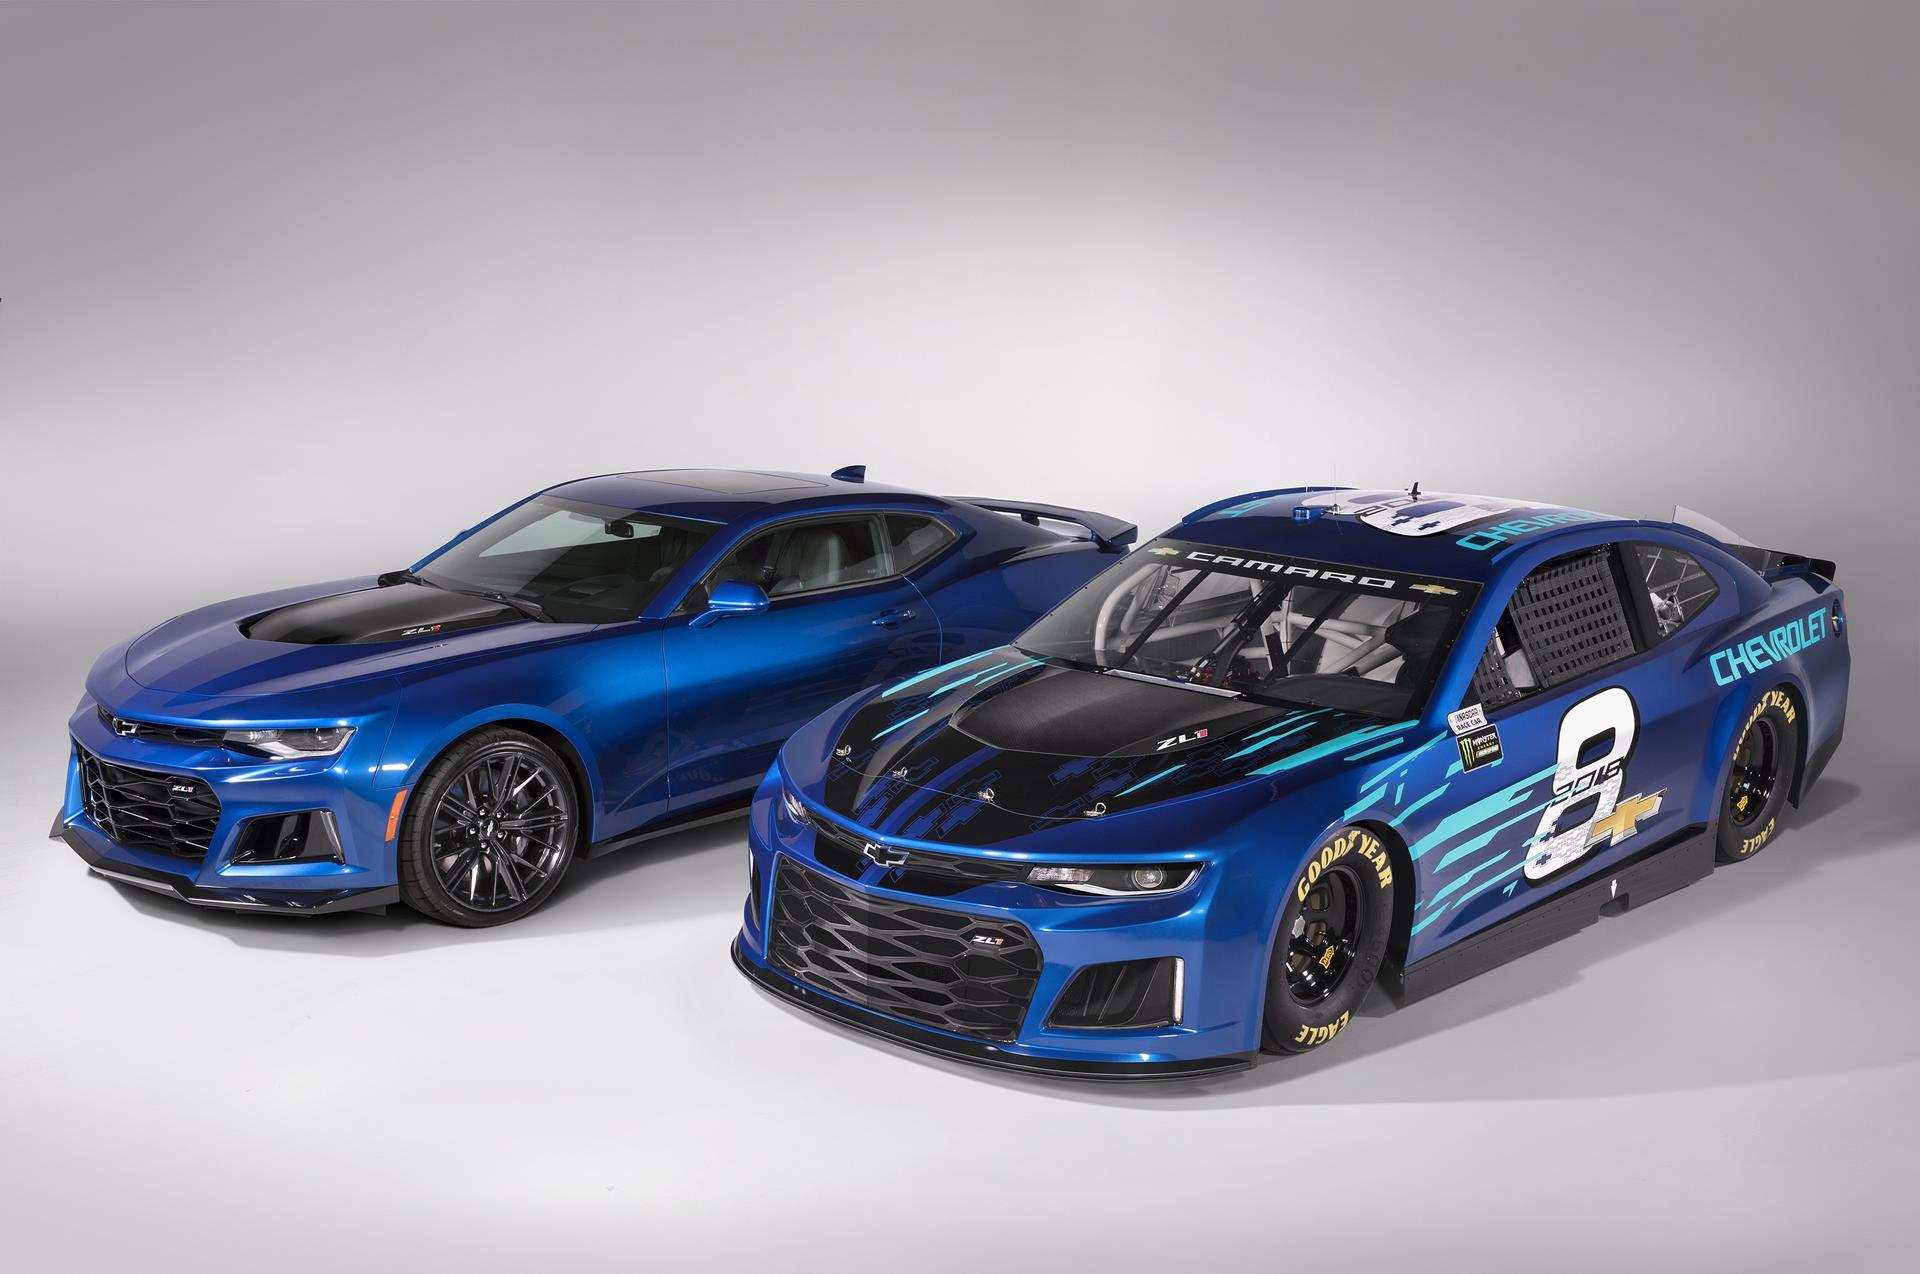 Chevrolet Camaro Zl1 Nascar Pictures News Research